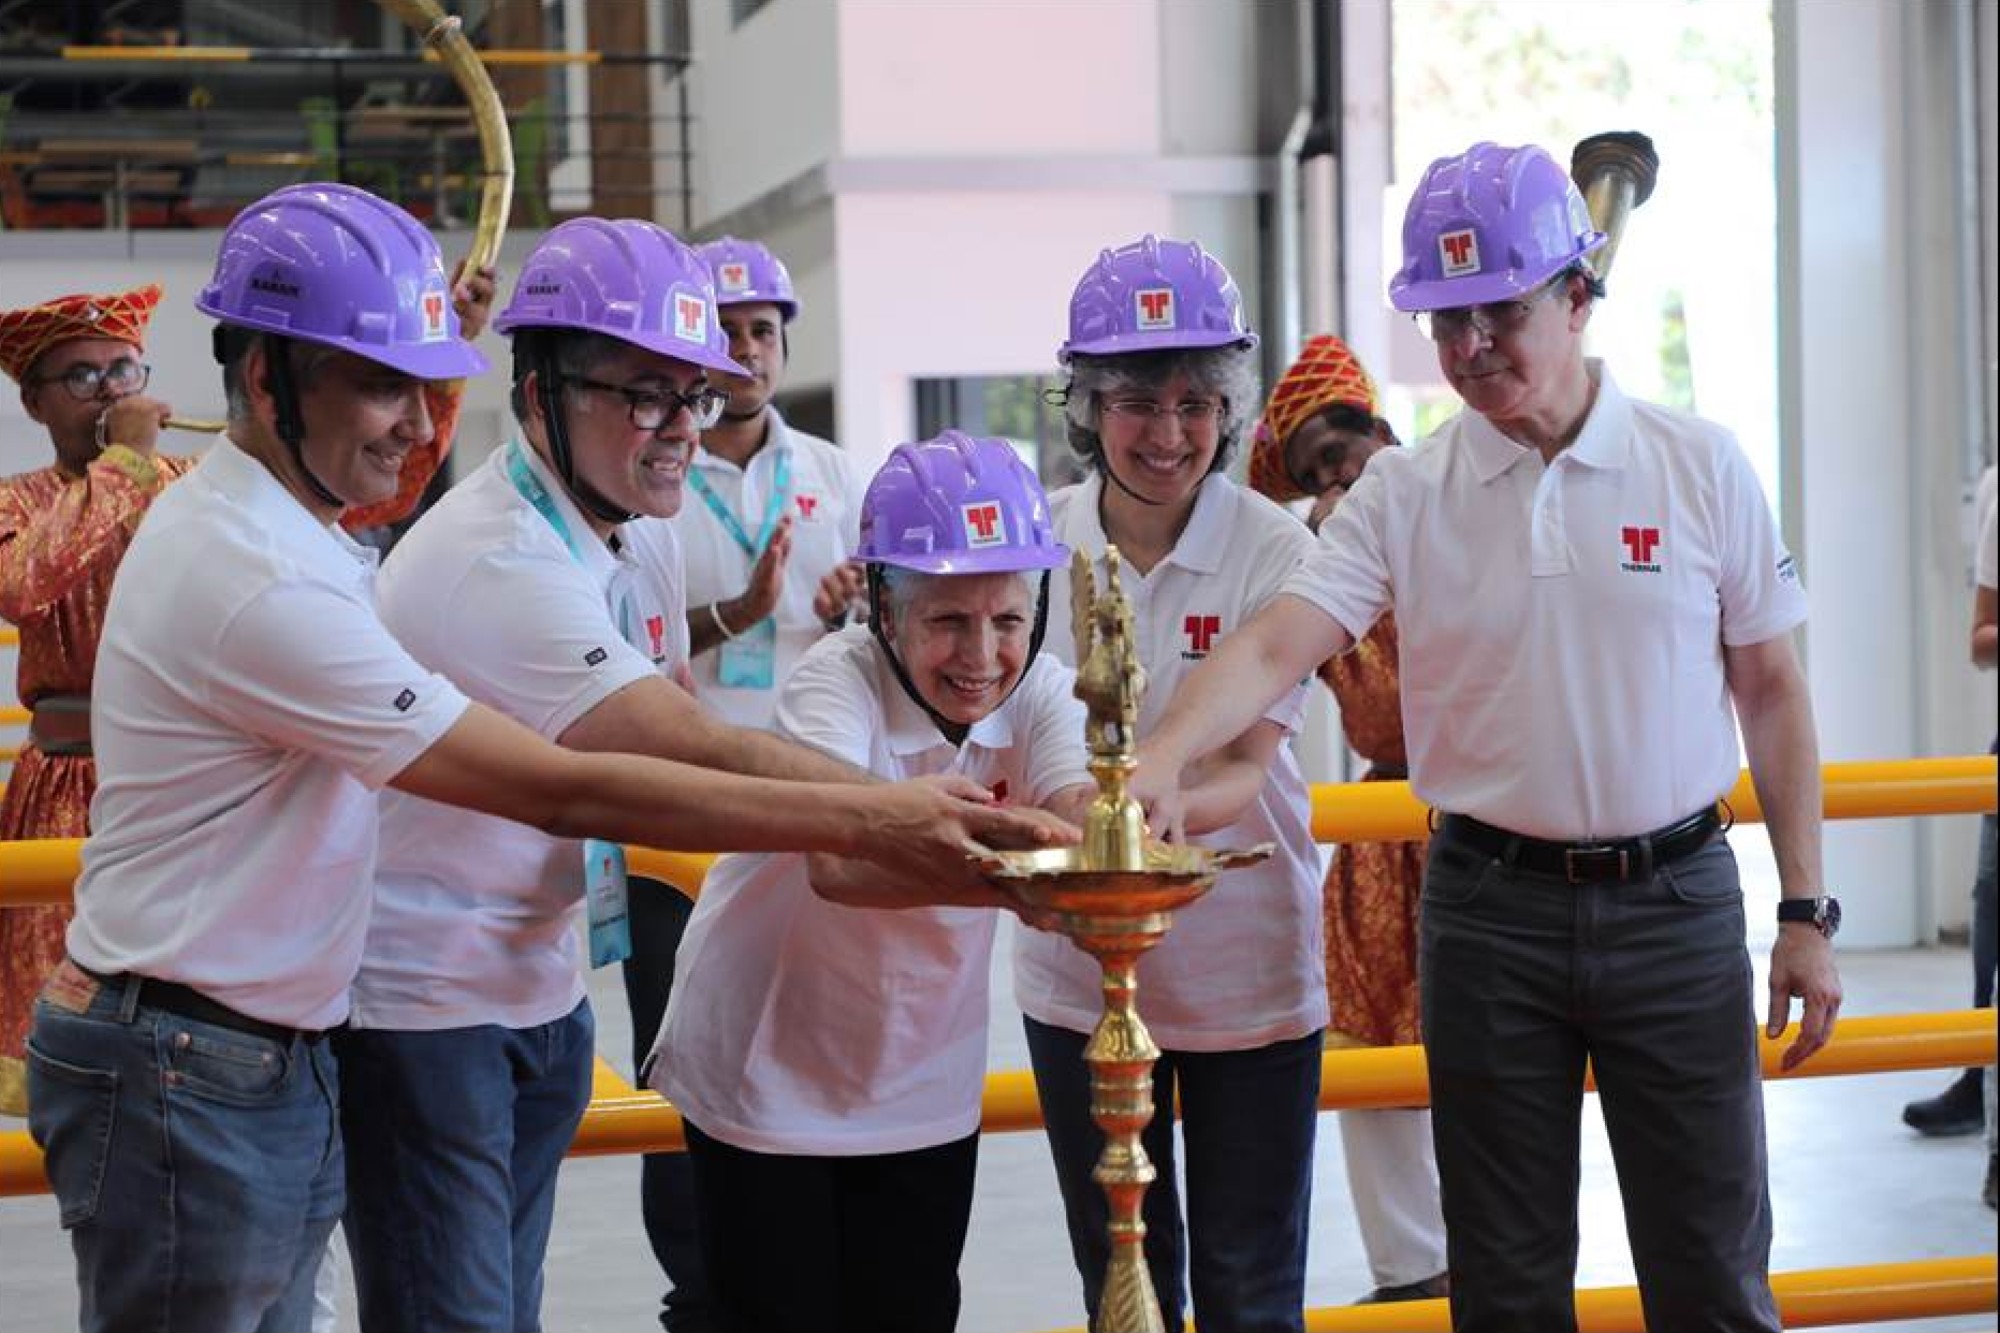 Thermax expands with its manufacturing factory for water and wastewater solutions in Pune